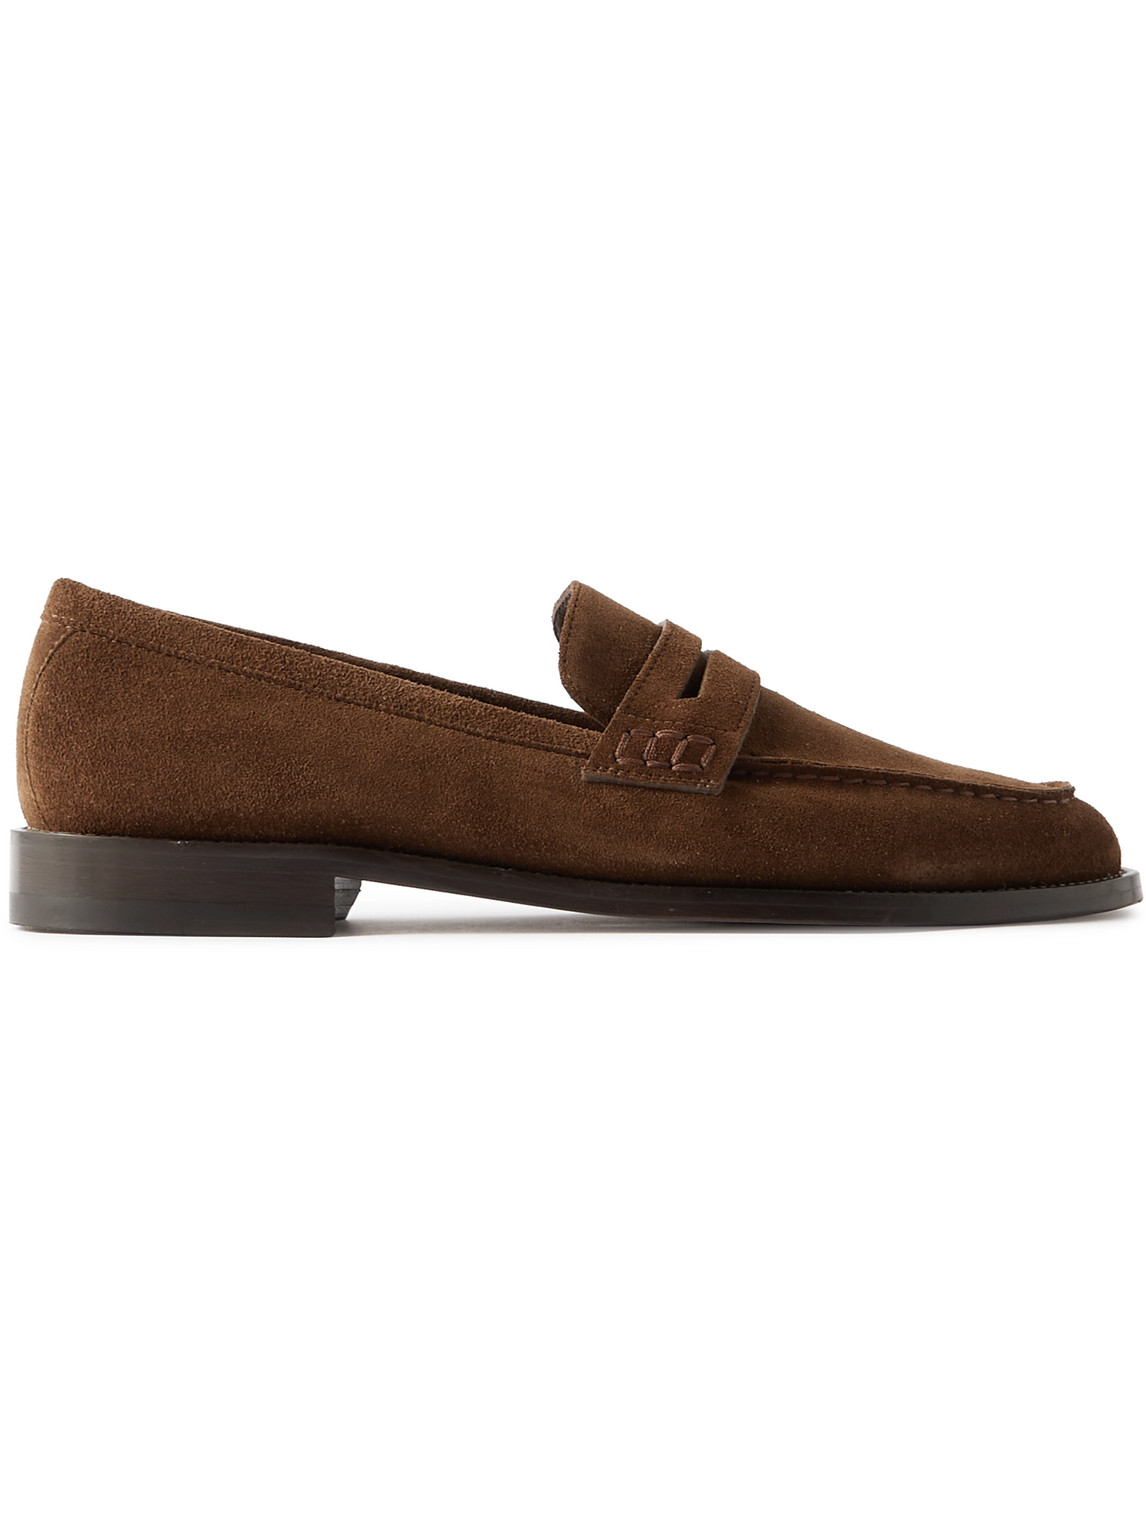 MANOLO BLAHNIK PERRY SUEDE PENNY LOAFERS